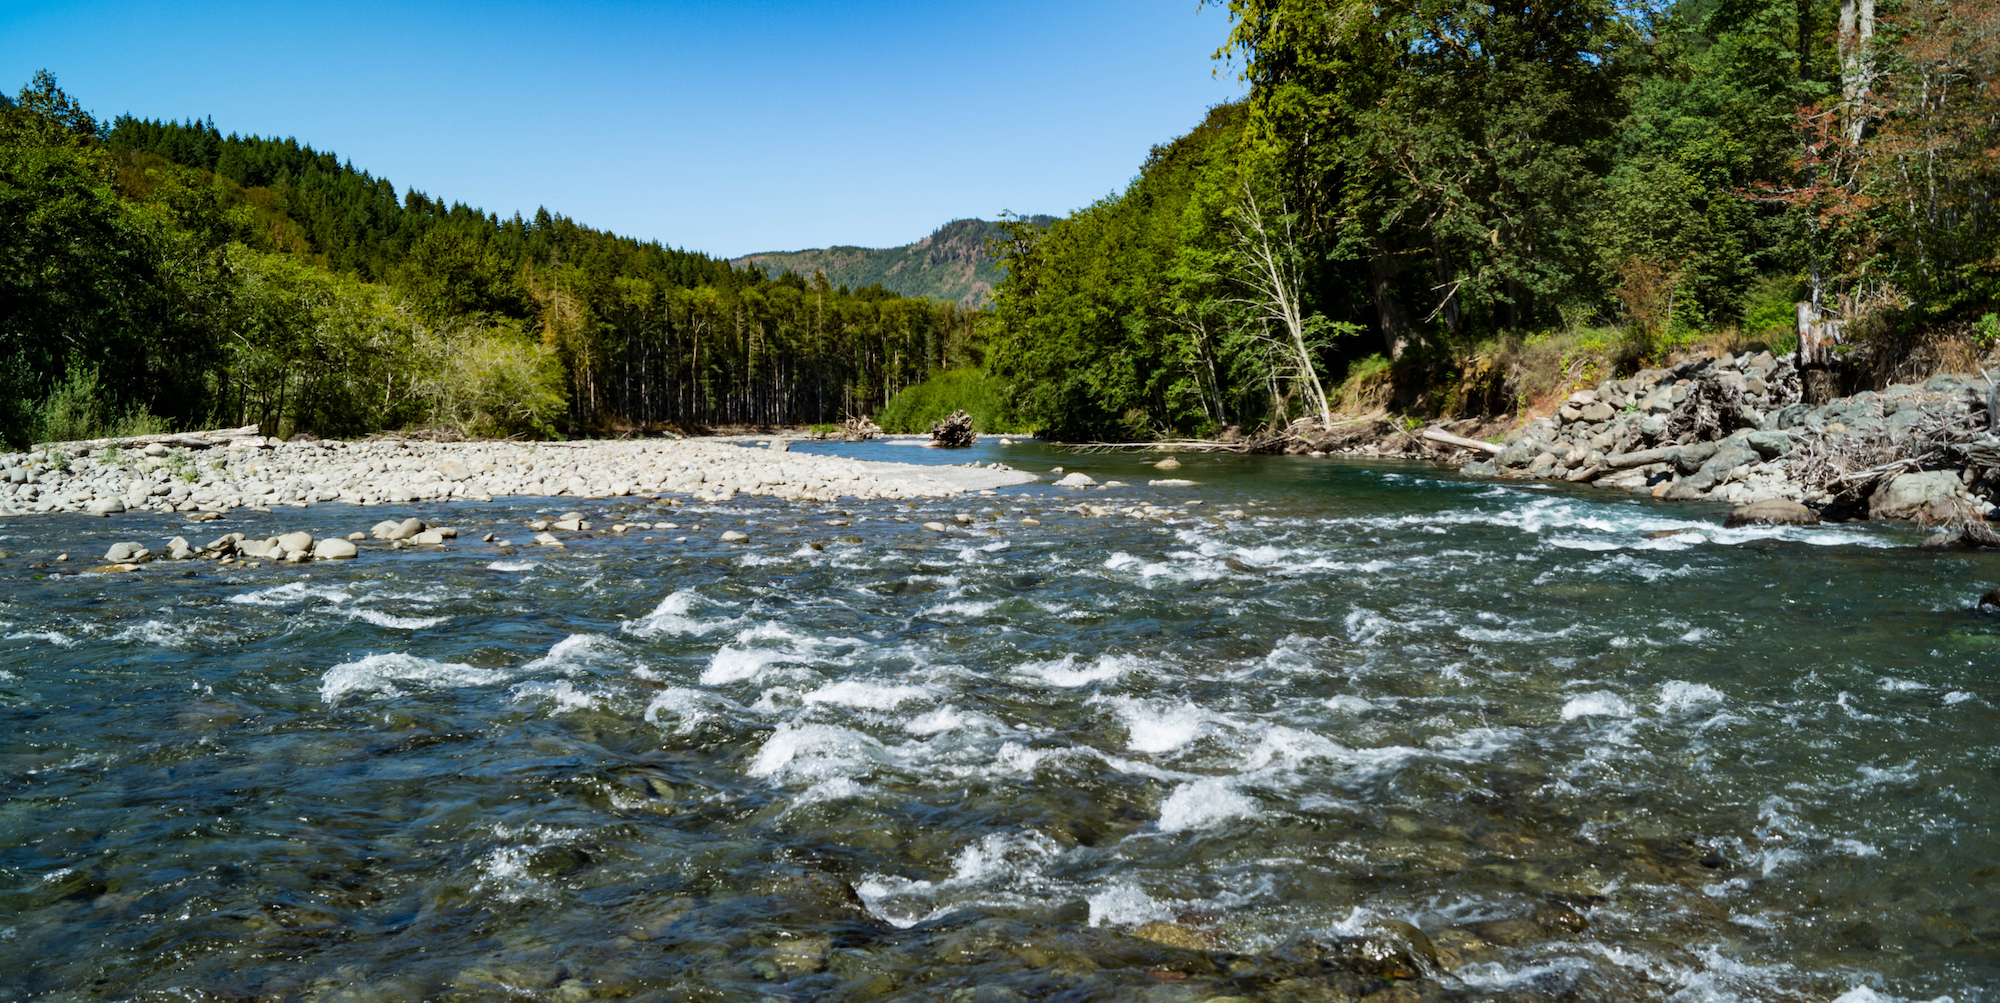 Free flowing Elwha River through Olympic National Park